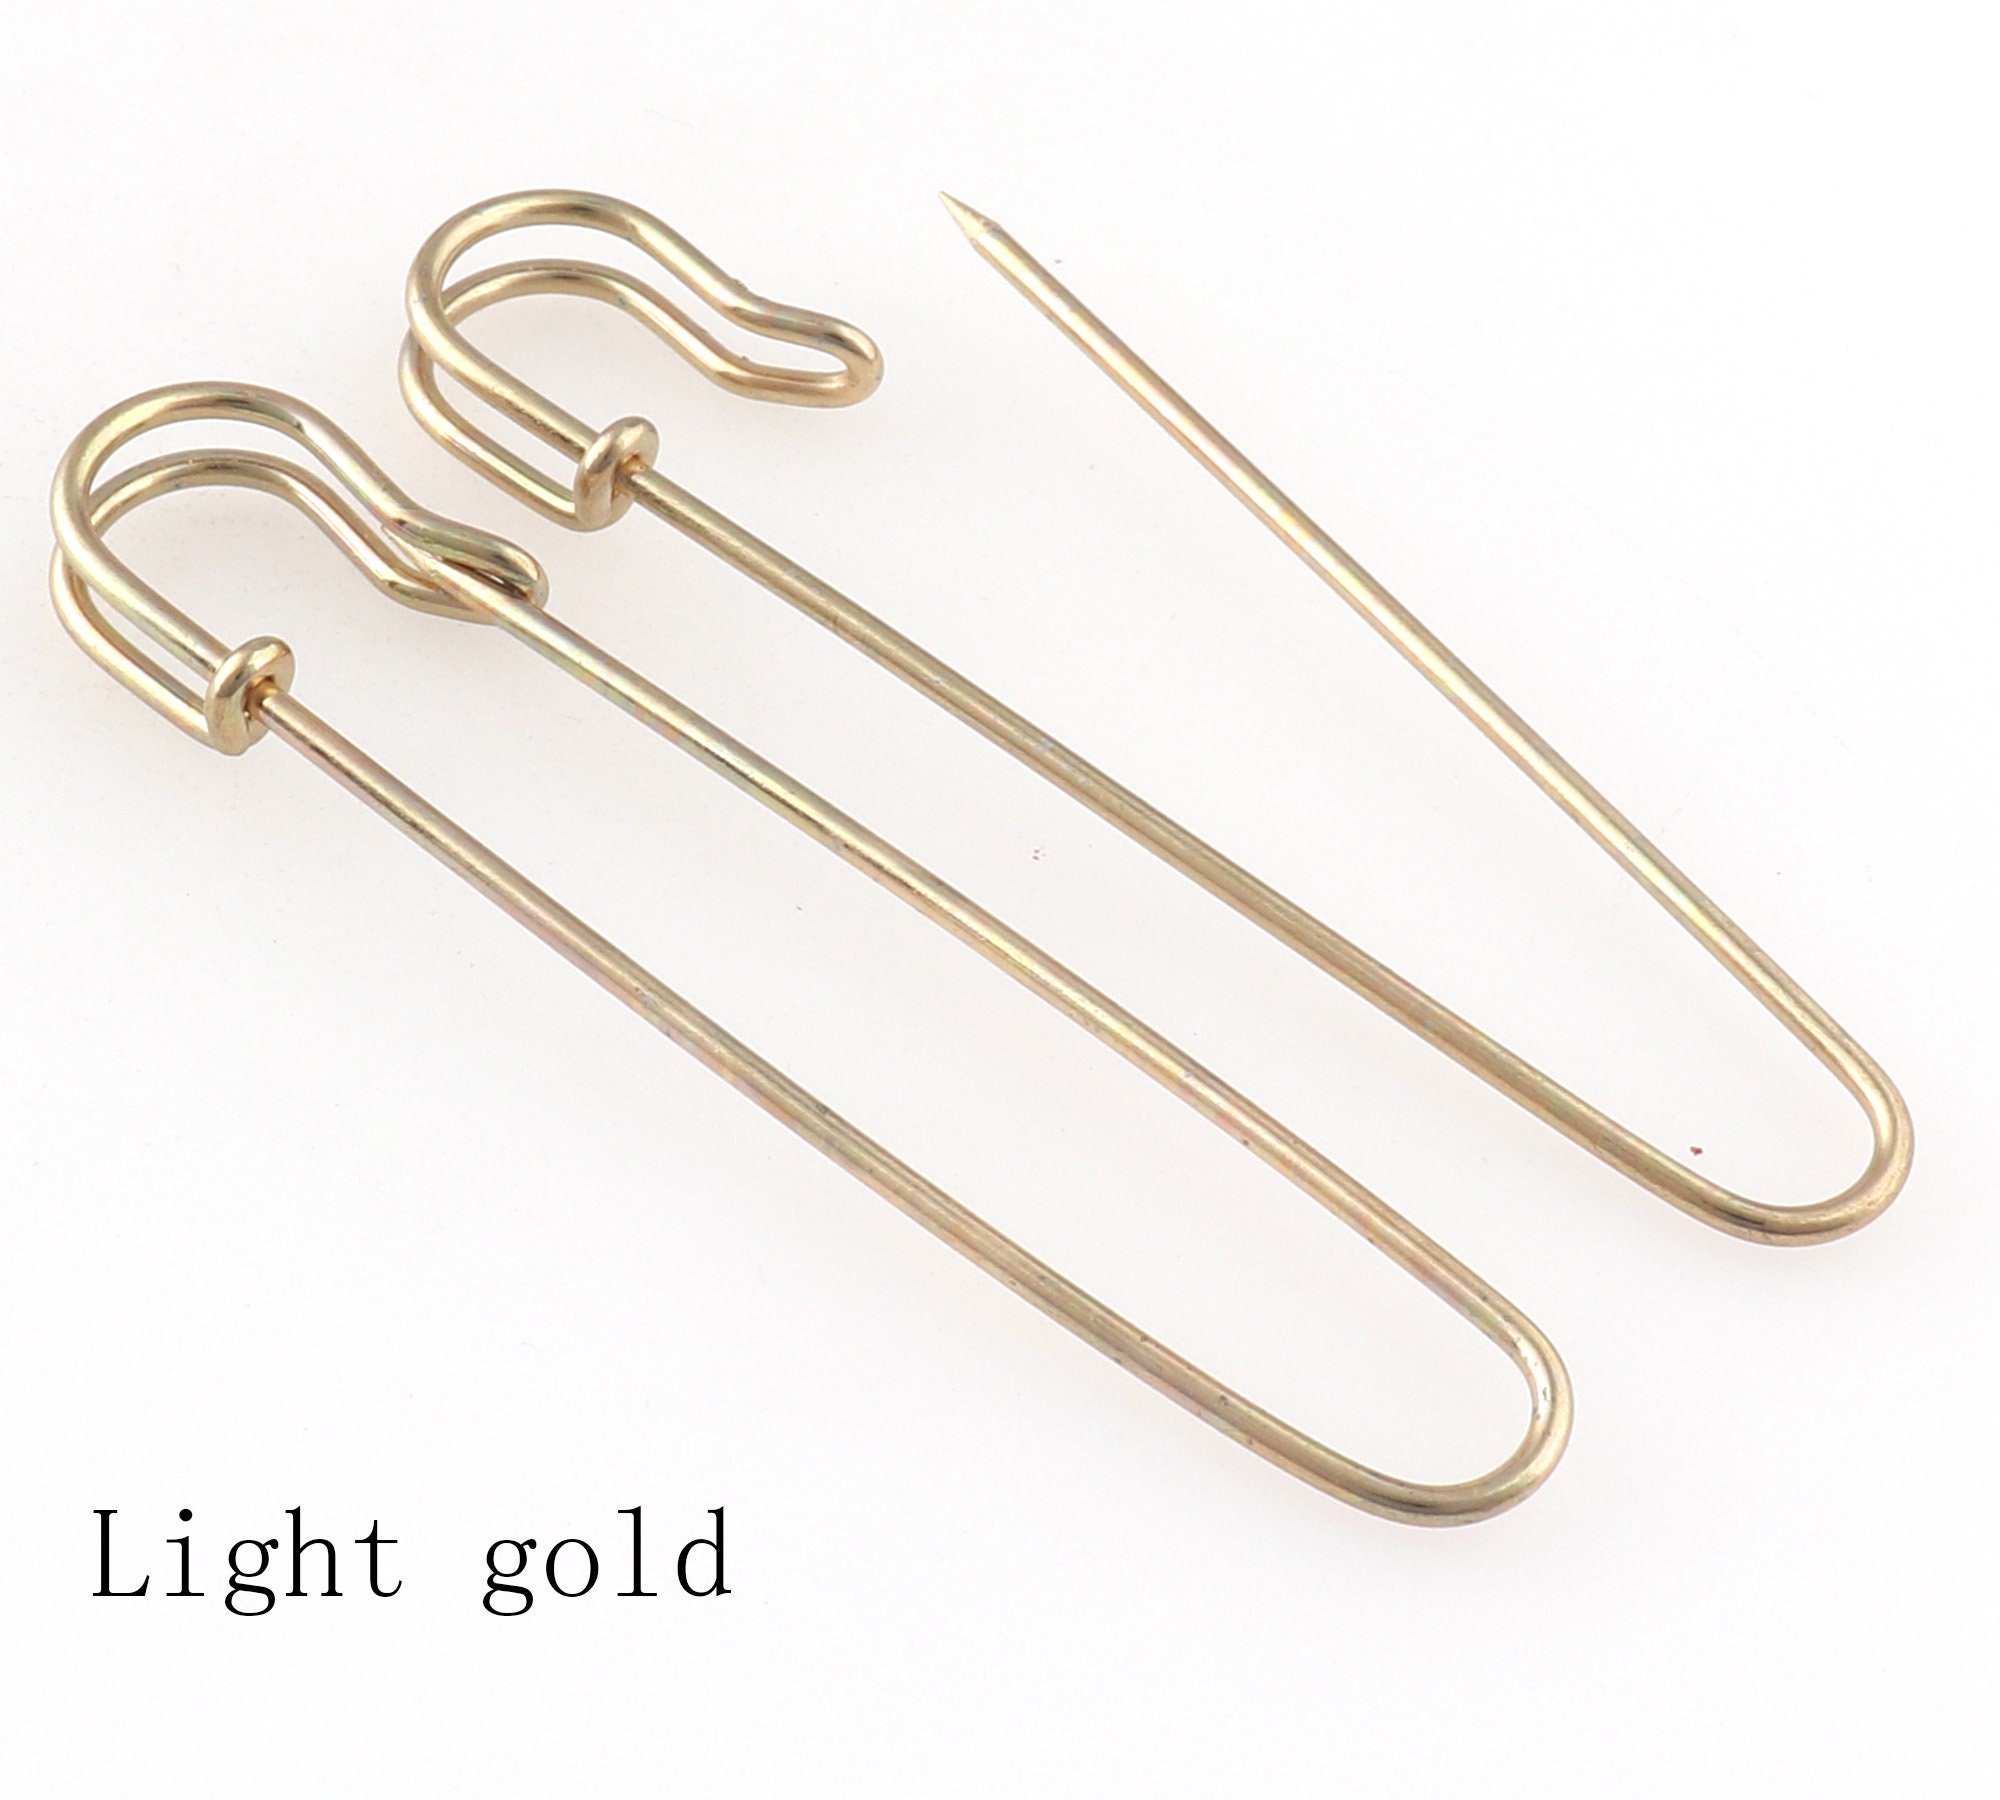 Silver Safety pins Coiless Safety Pins Larger Safety Pins Kilt Pins Broochs  Letter Bar Pins Apparel Accessories DIY Sewing 4pcs 80mm